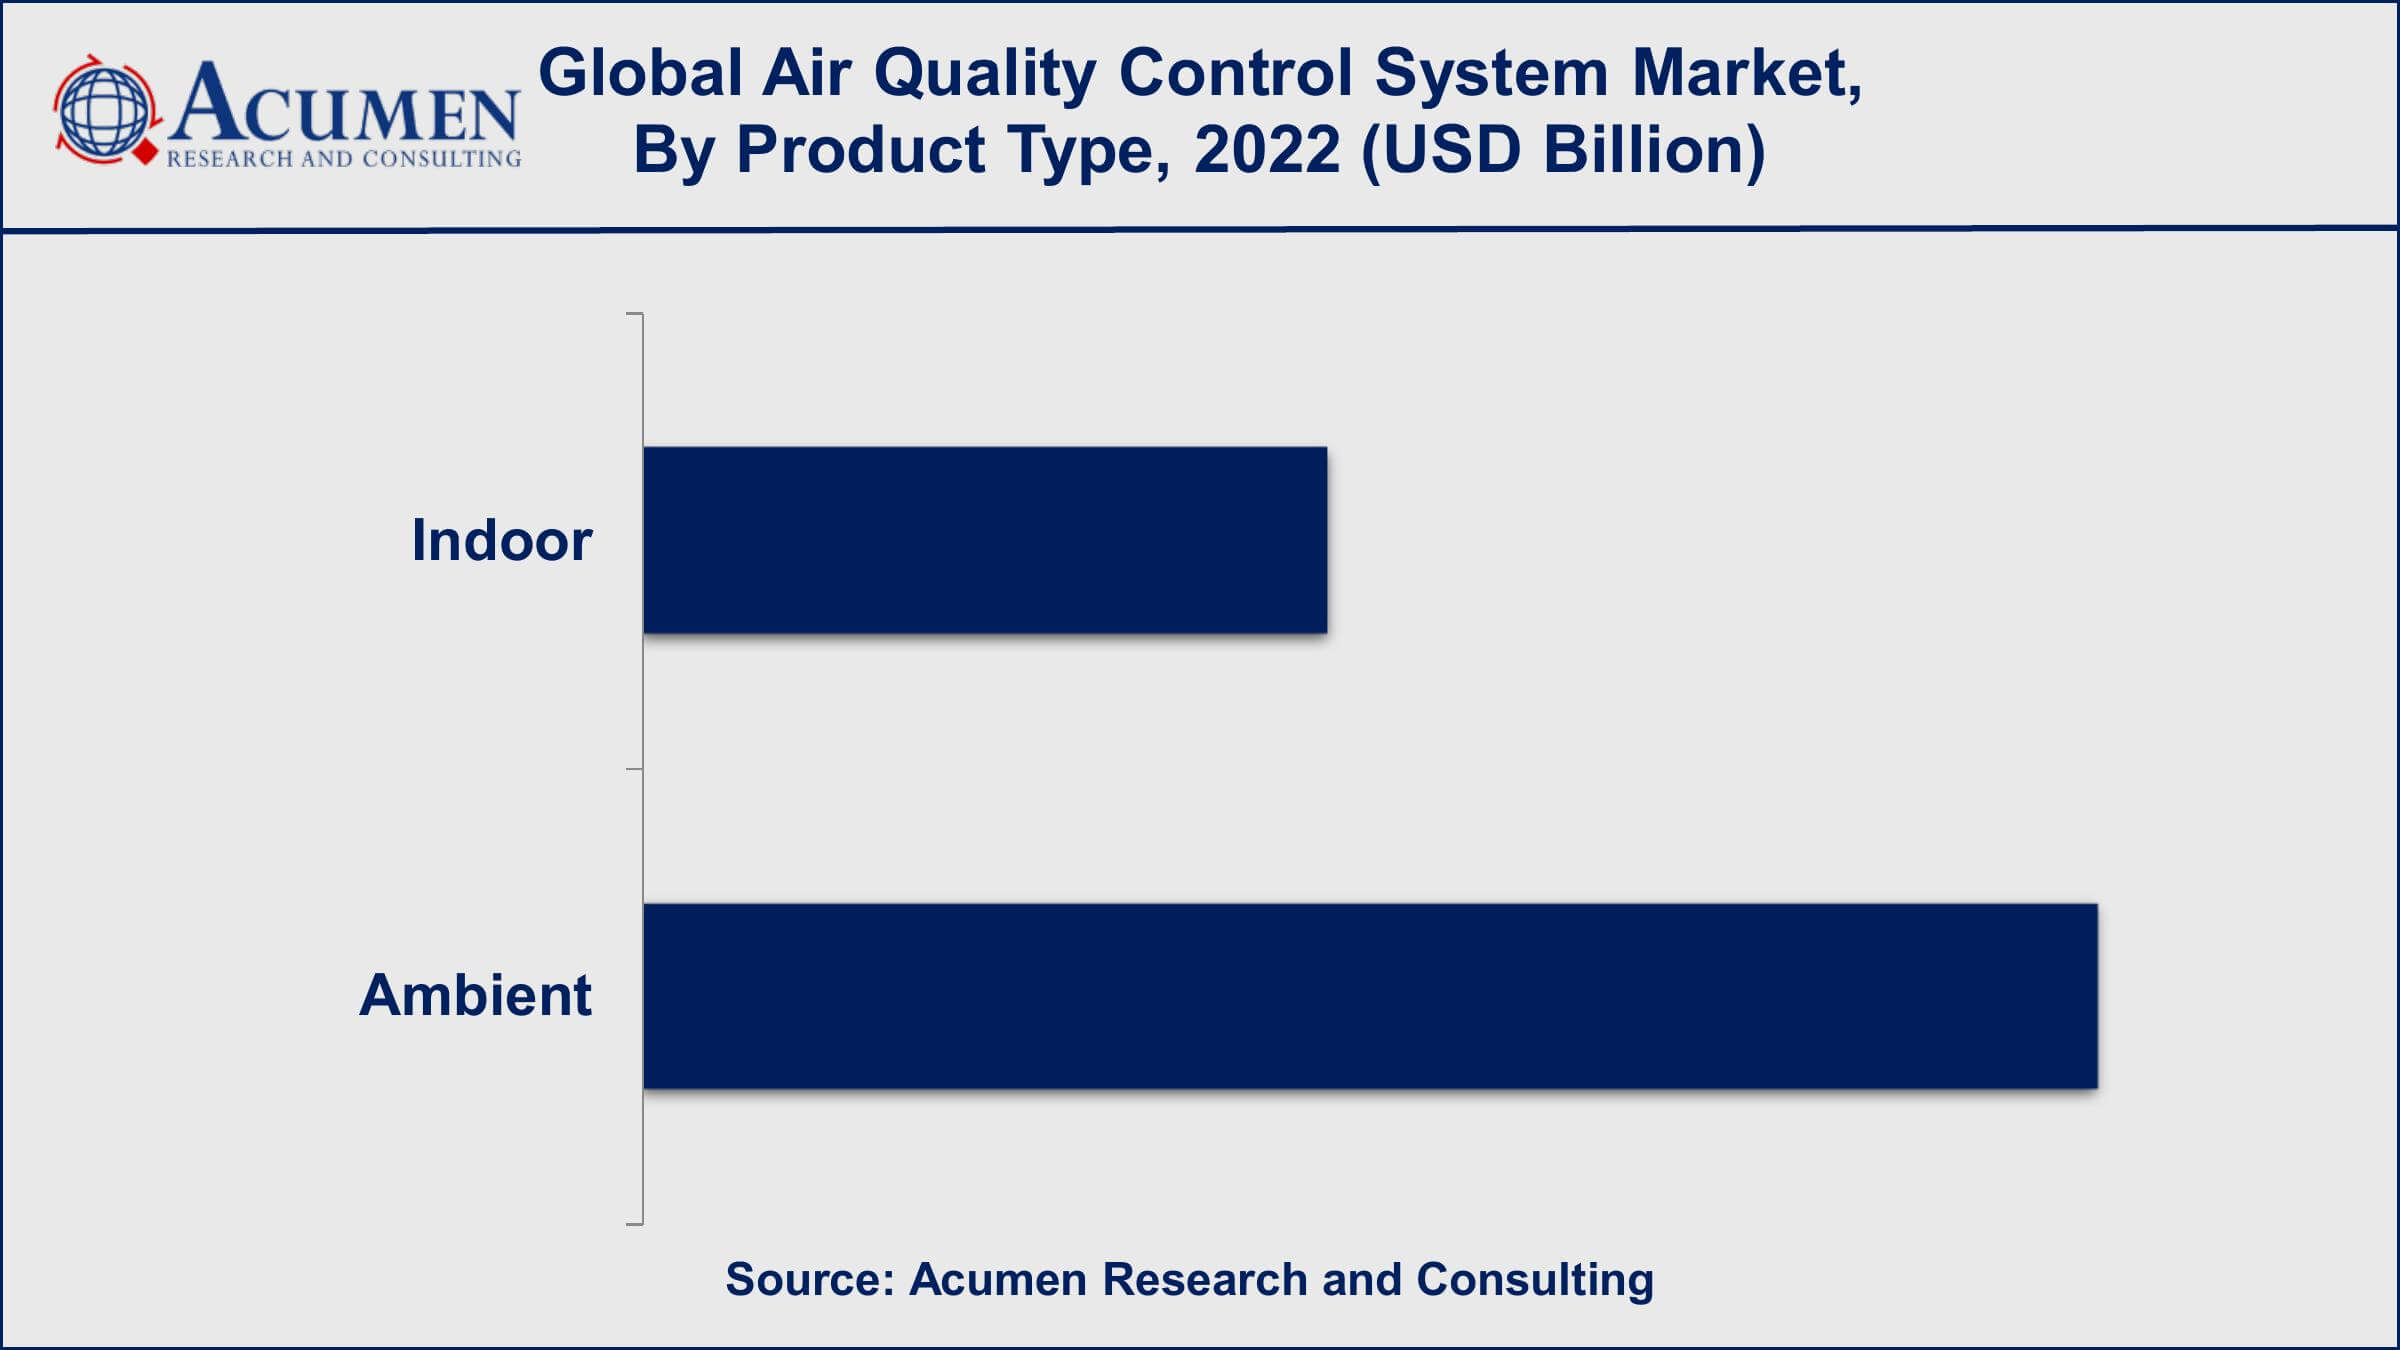 Air Quality Control System Market Drivers